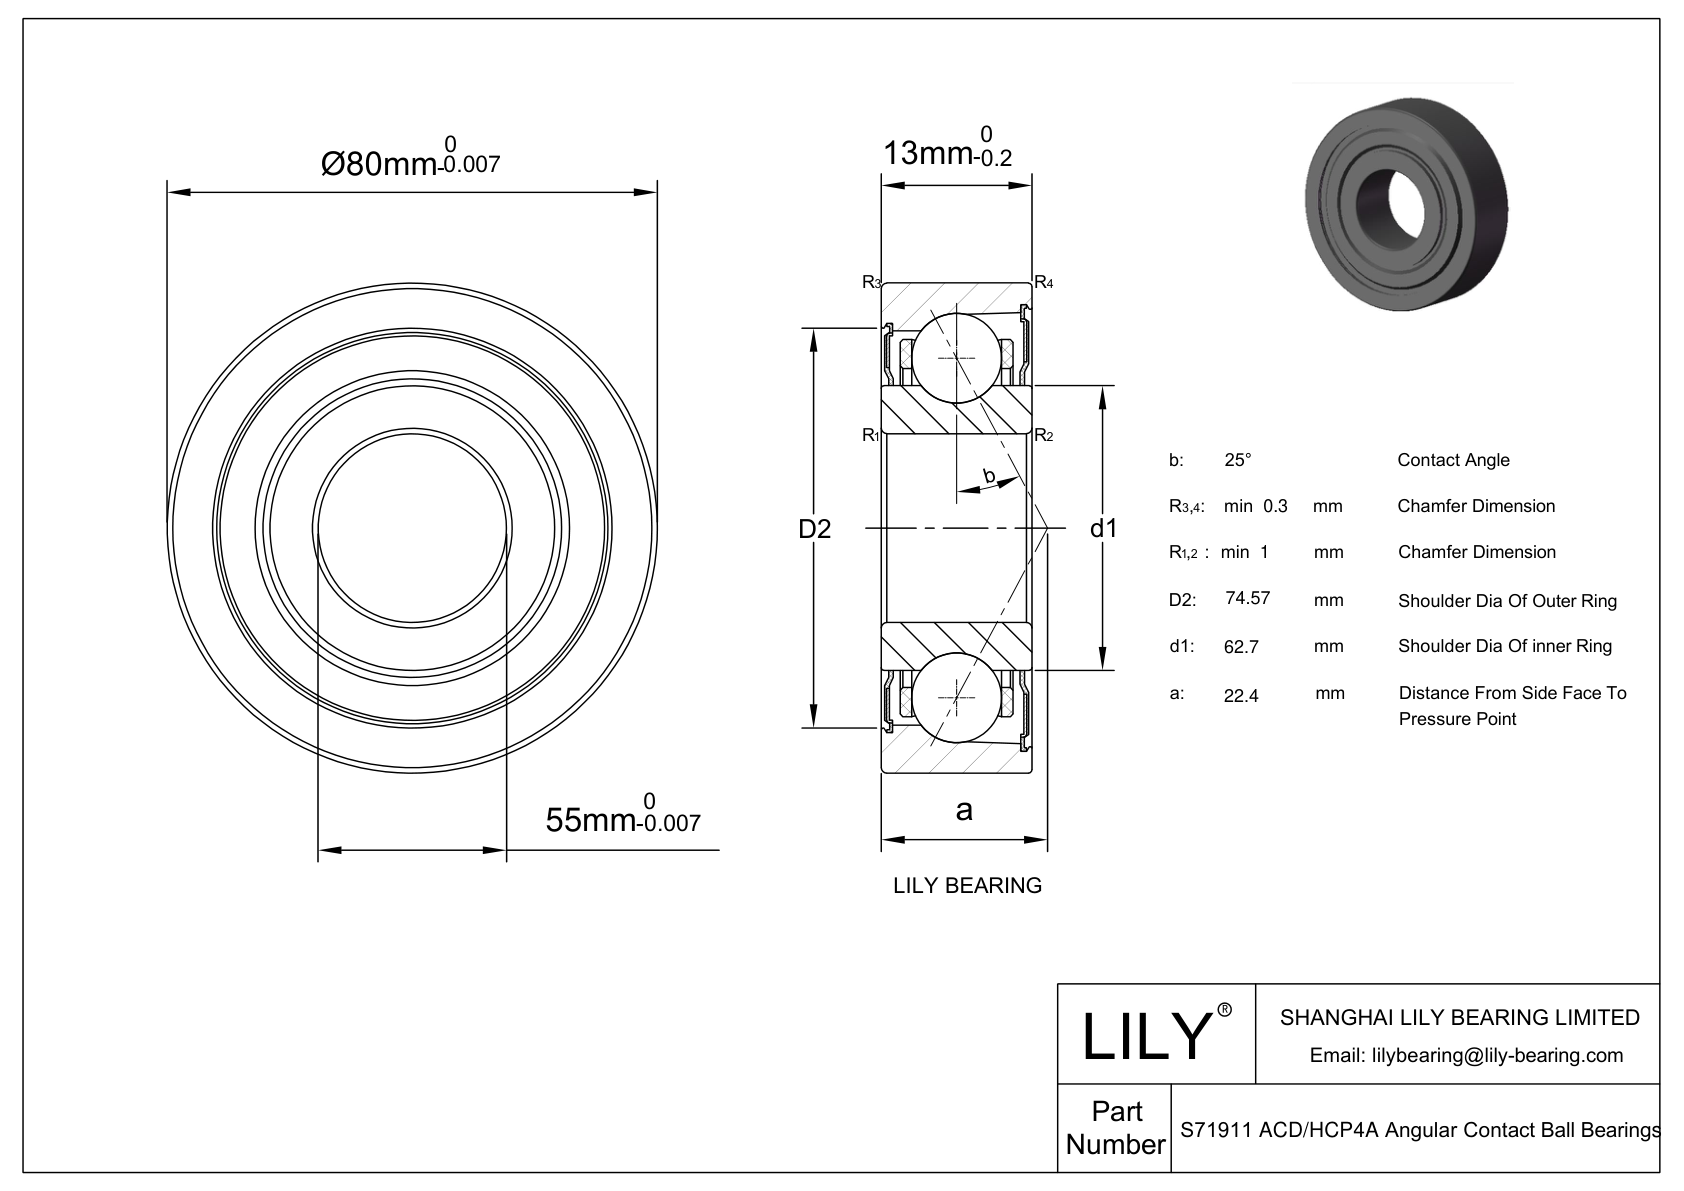 S71911 ACD/HCP4A Super Precision Angular Contact Ball Bearings cad drawing